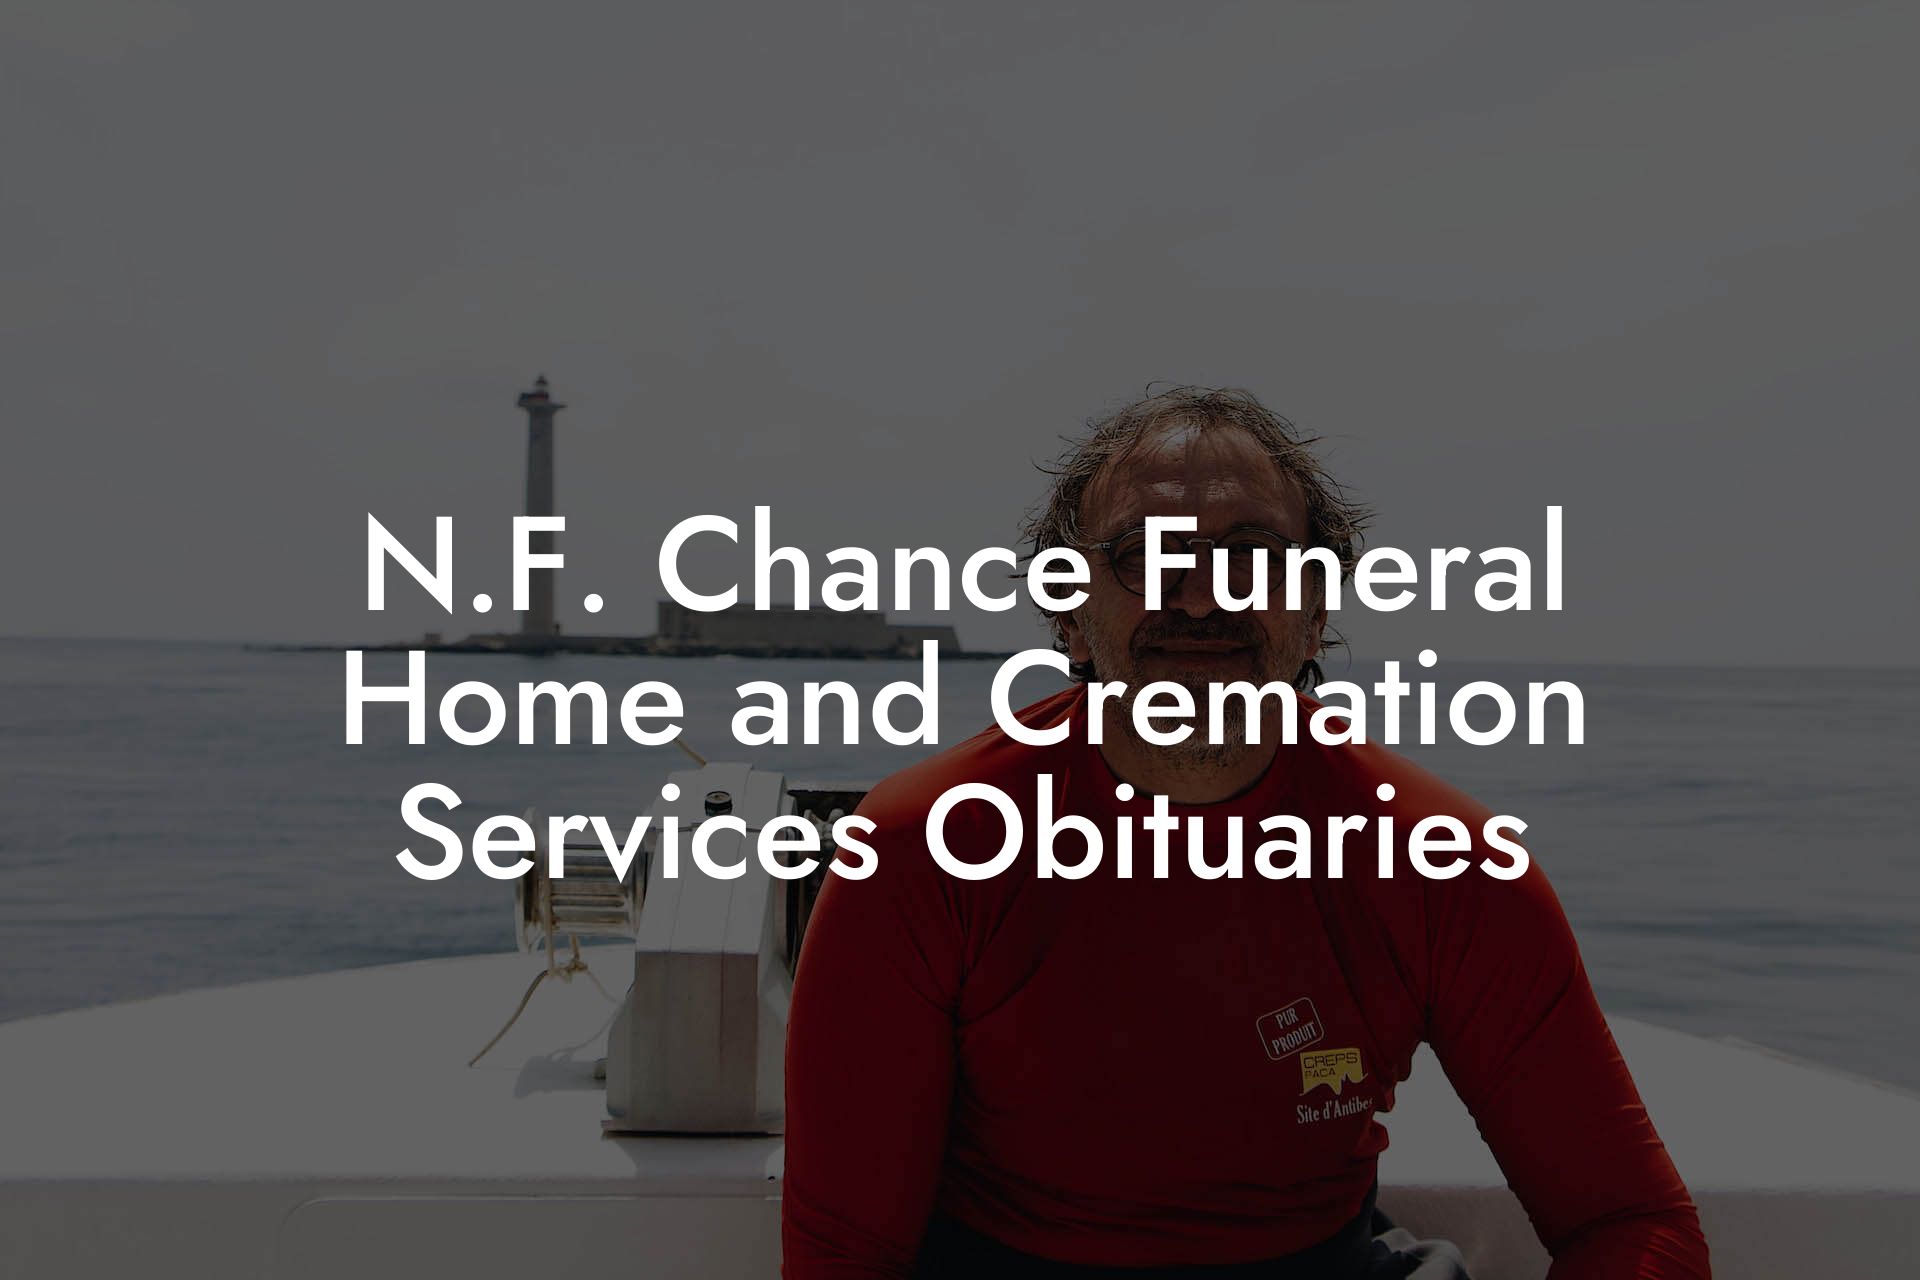 N.F. Chance Funeral Home and Cremation Services Obituaries